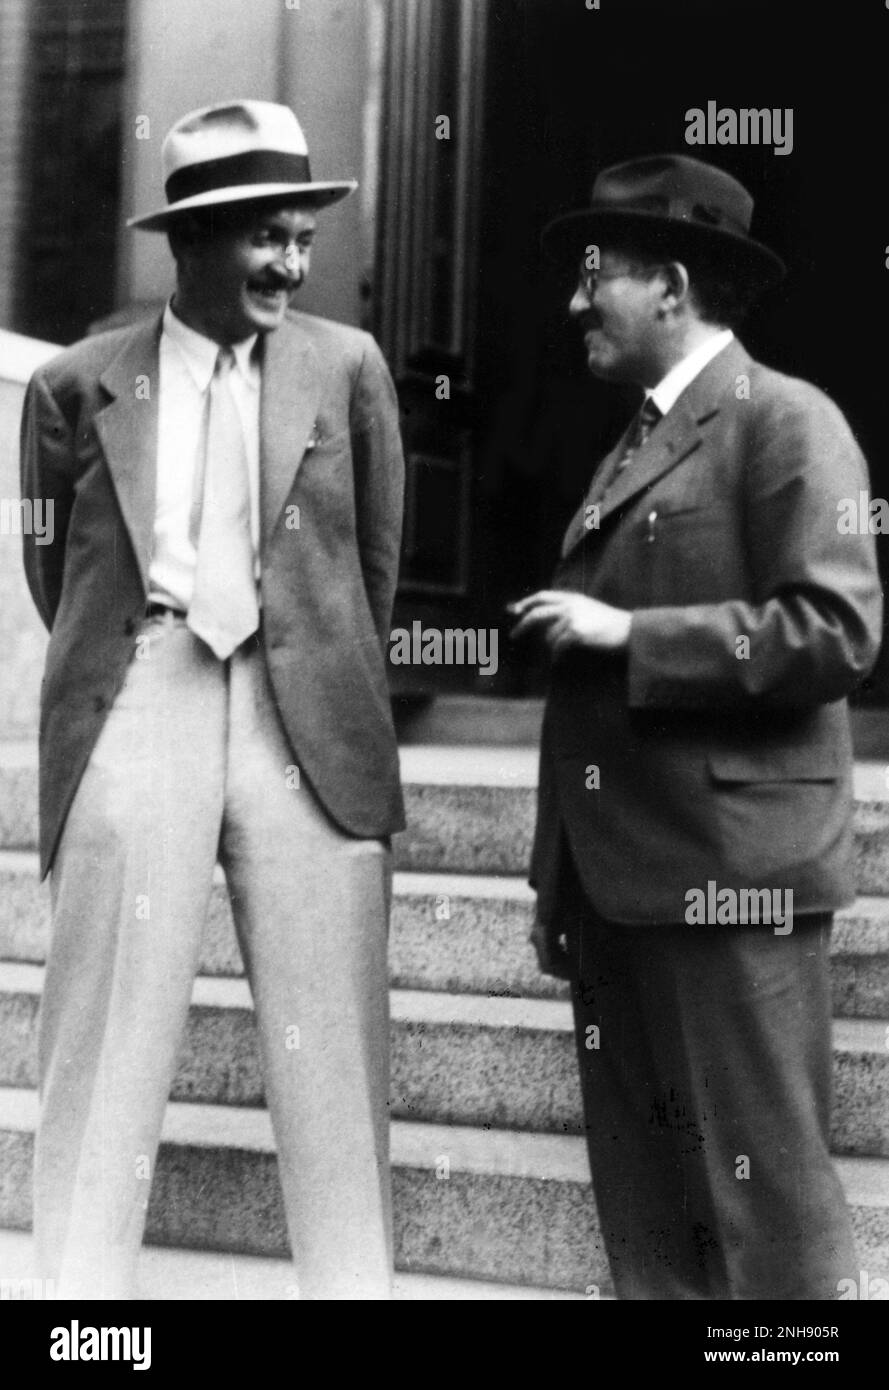 Fritz Zwicky (1898-1974), Swiss astronomer who worked on dark matter, and Otto Stern (1888-1969), German-American physicist and 1943 Nobel laureate in physics. Stock Photo